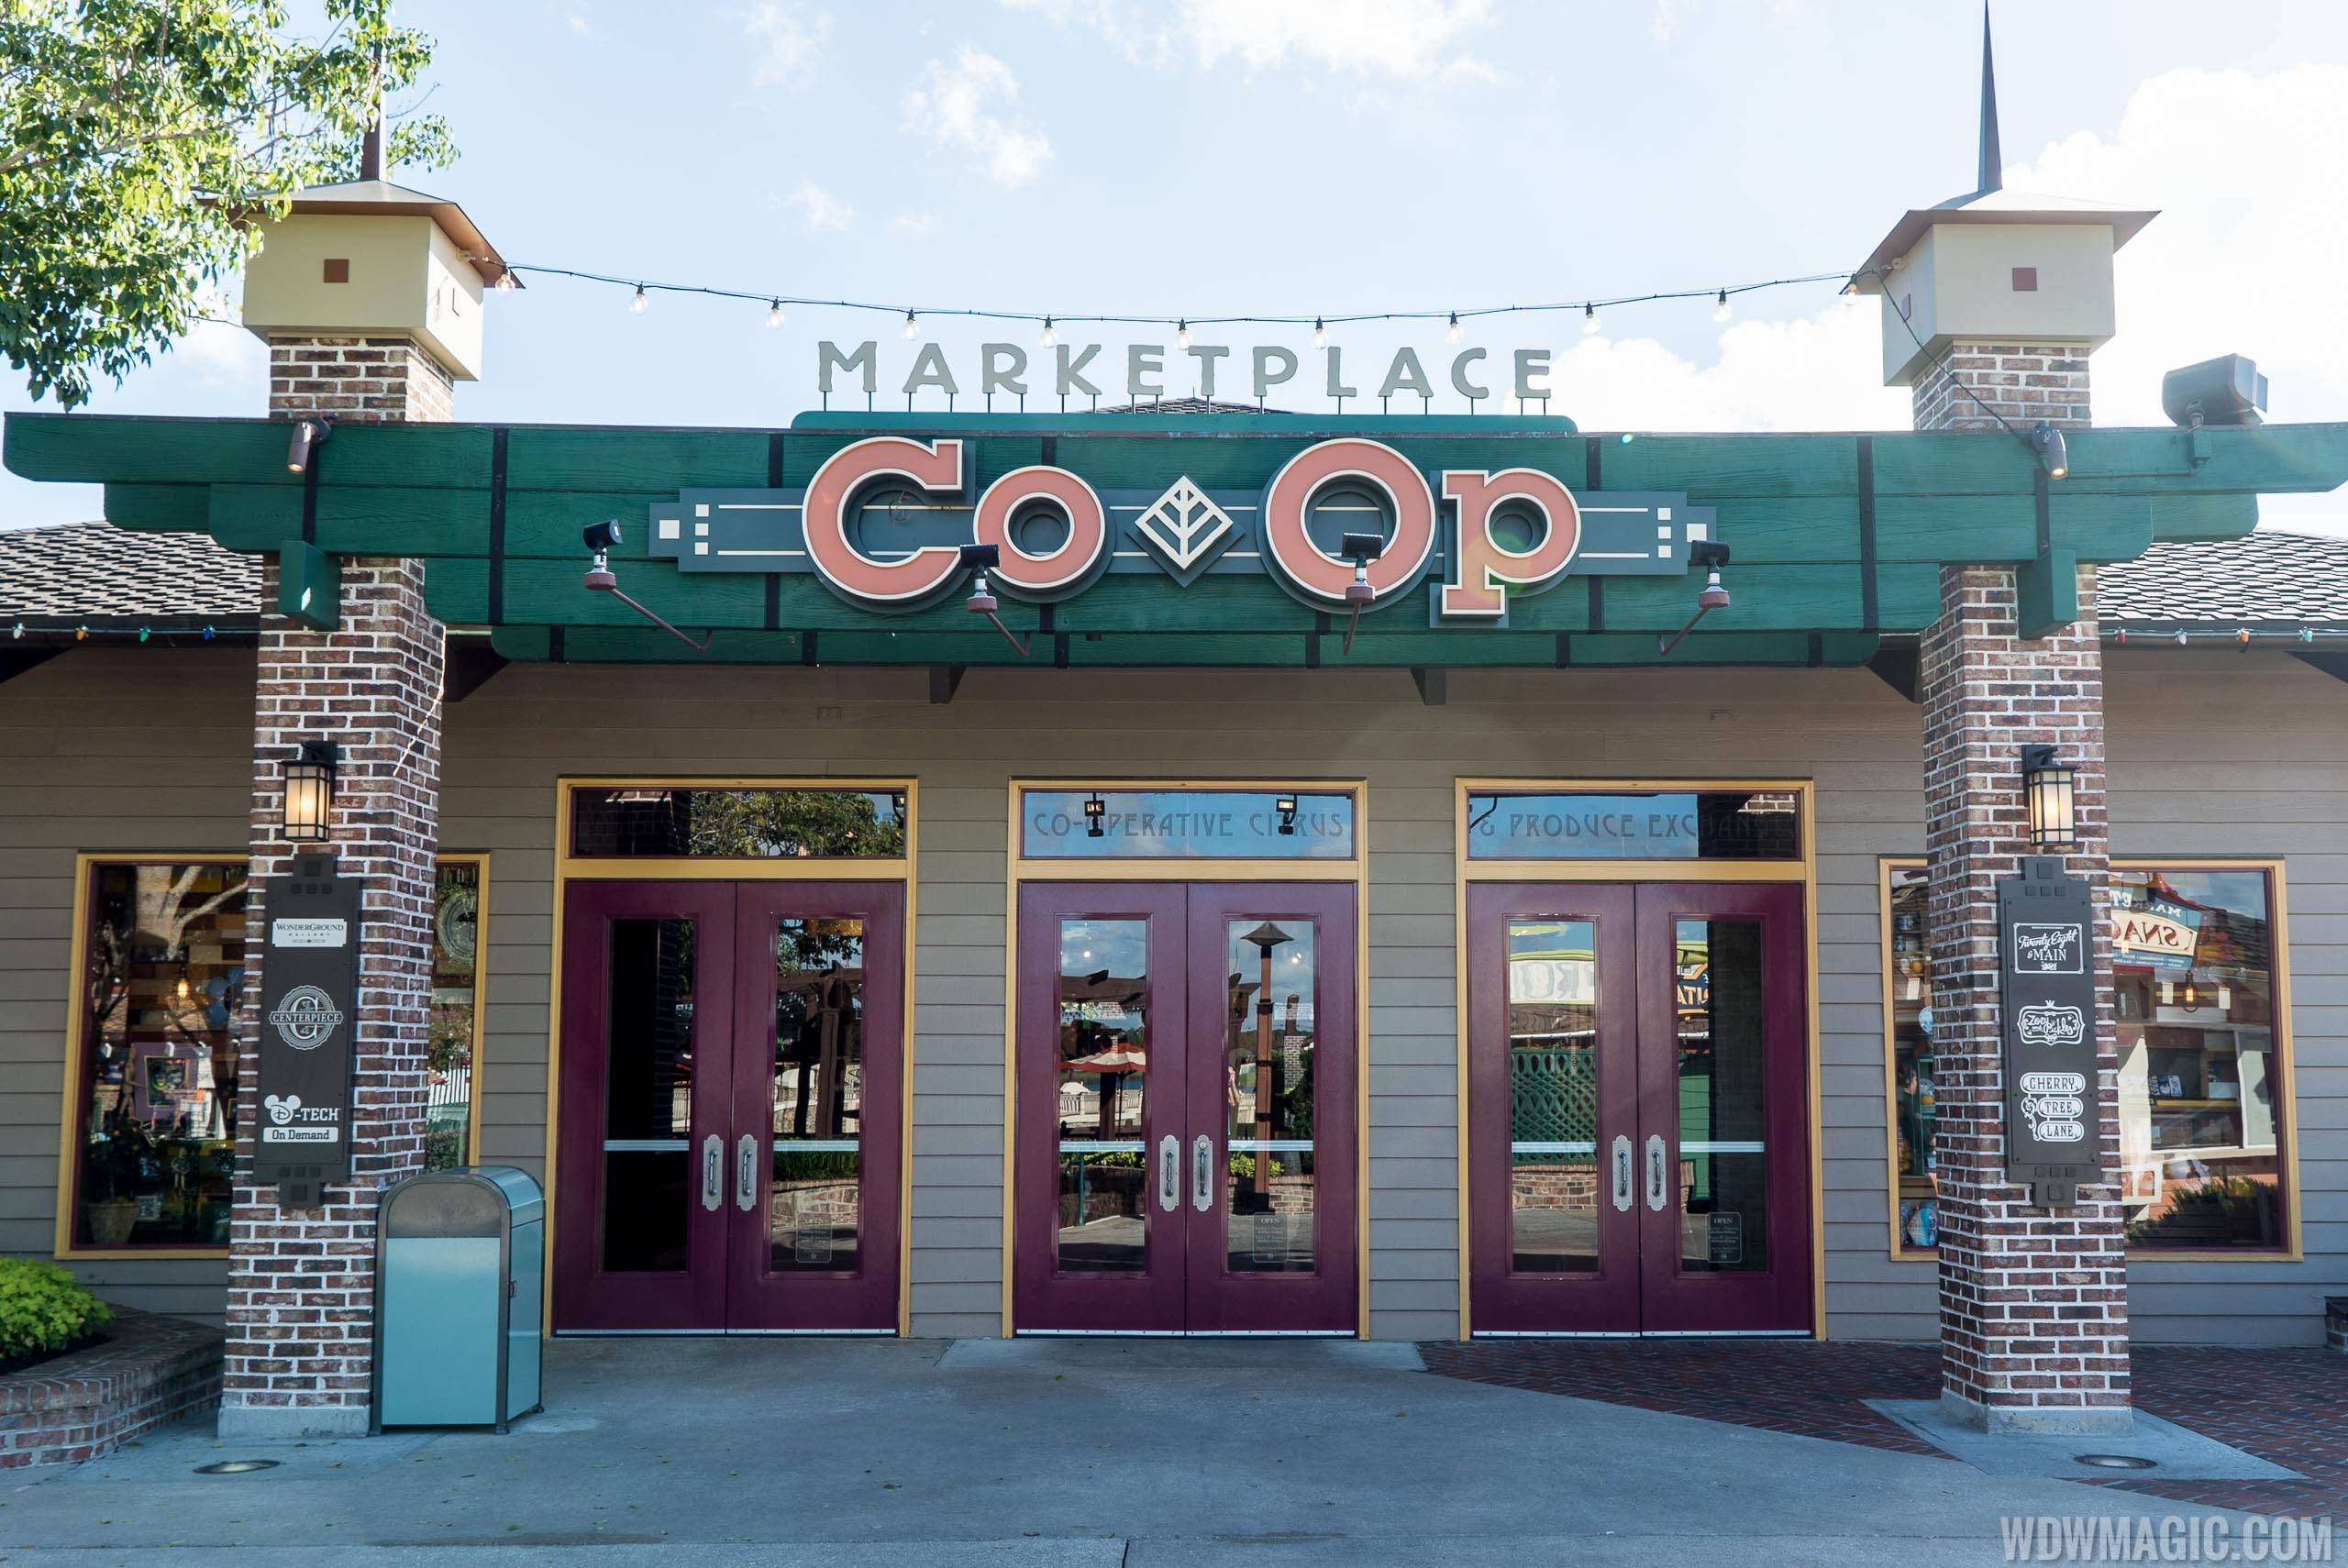 New mens apparel and accessory shop 'Twenty Eight and Main' to open in the Marketplace Co-Op at Disney Springs